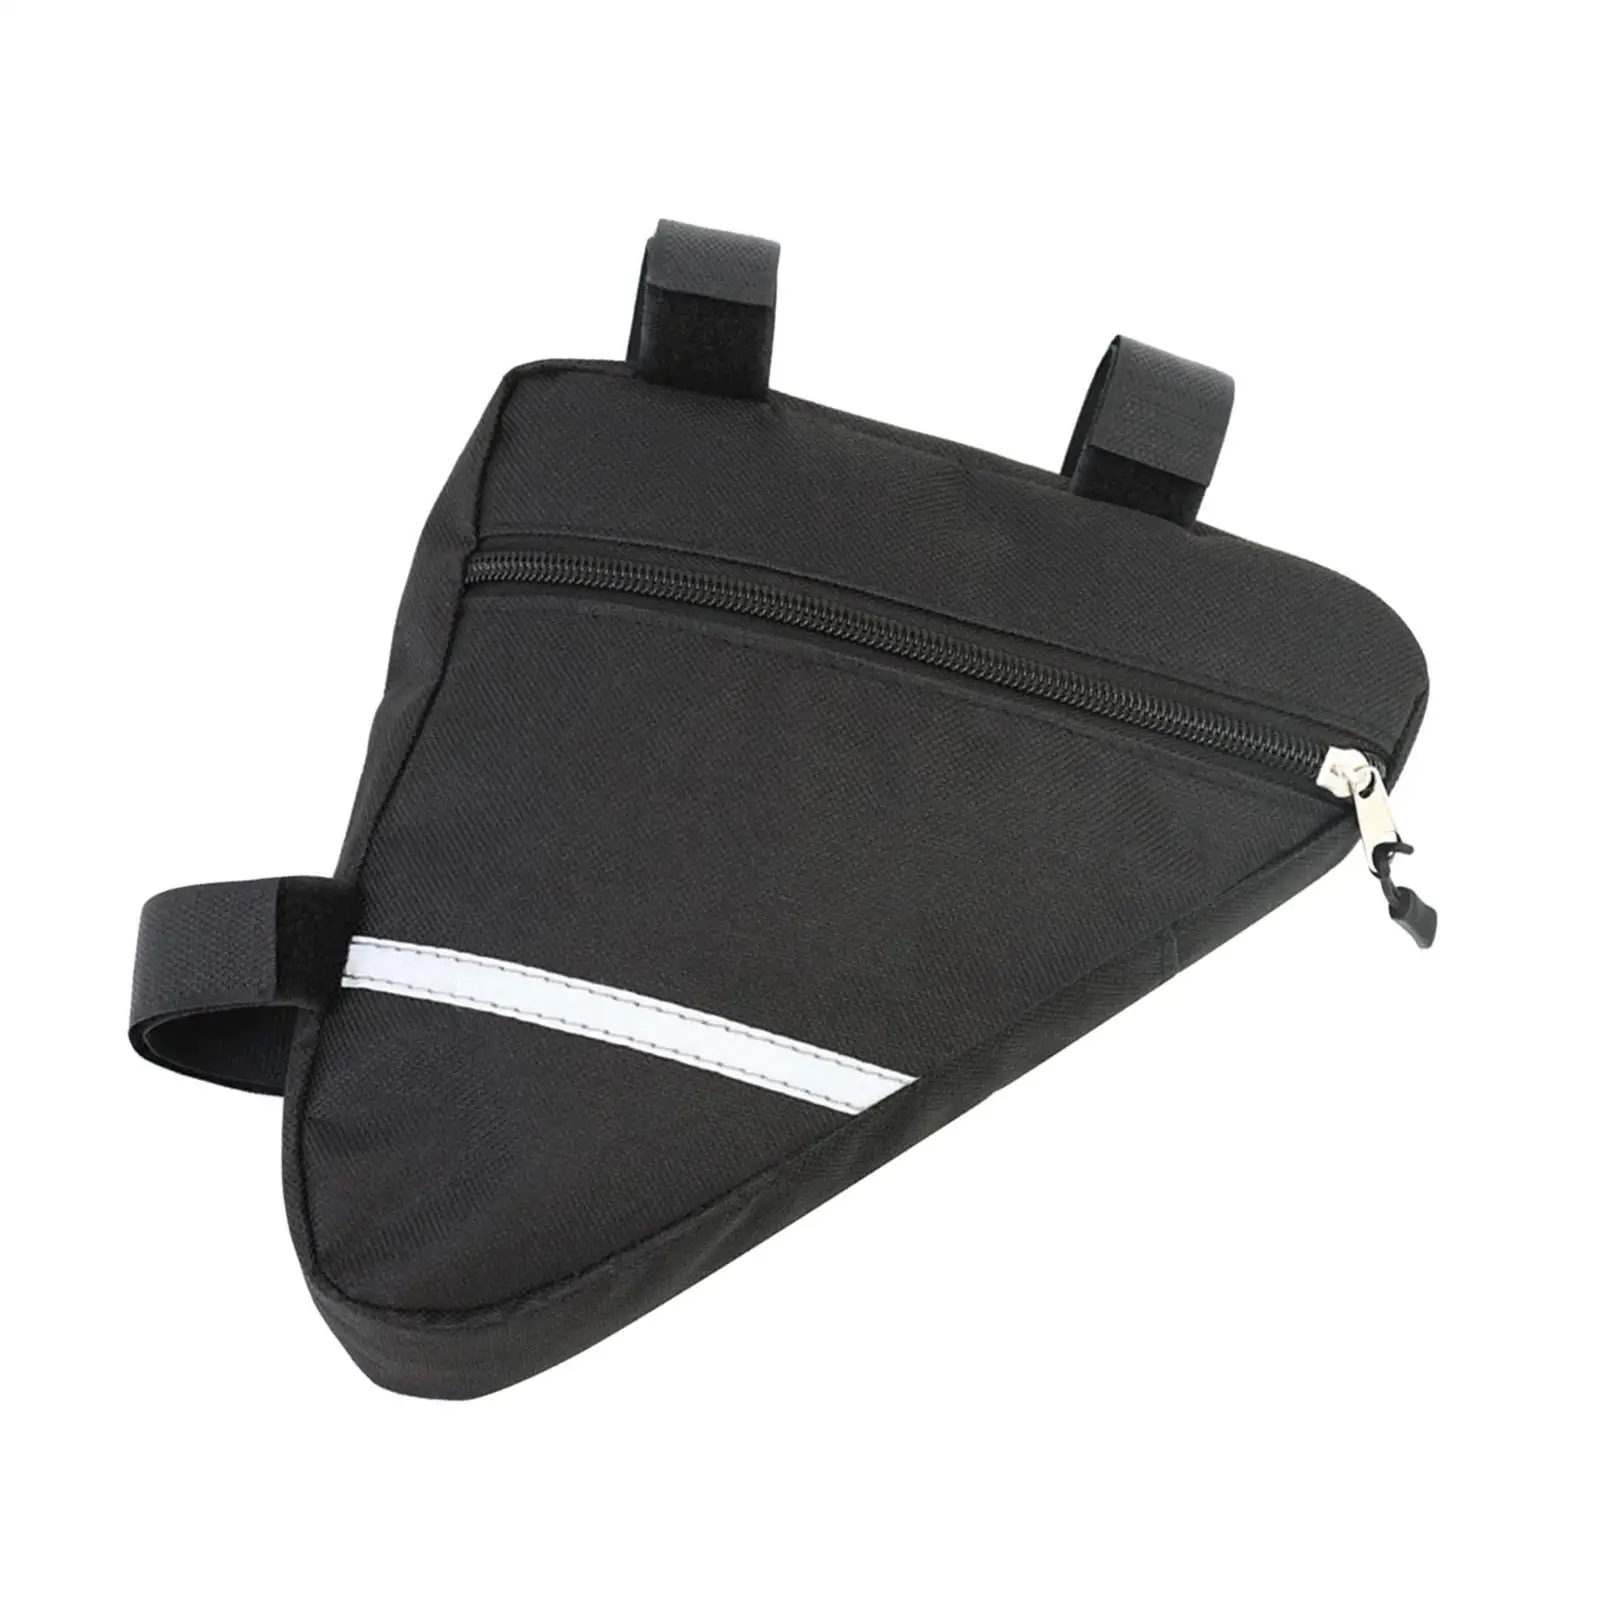 Waterproof Bike Frame Bag Cycling Bicycle Pouch Accessories Storage Bag Saddle Bag Tube Pouch for Keys Repair Tools Outdoor